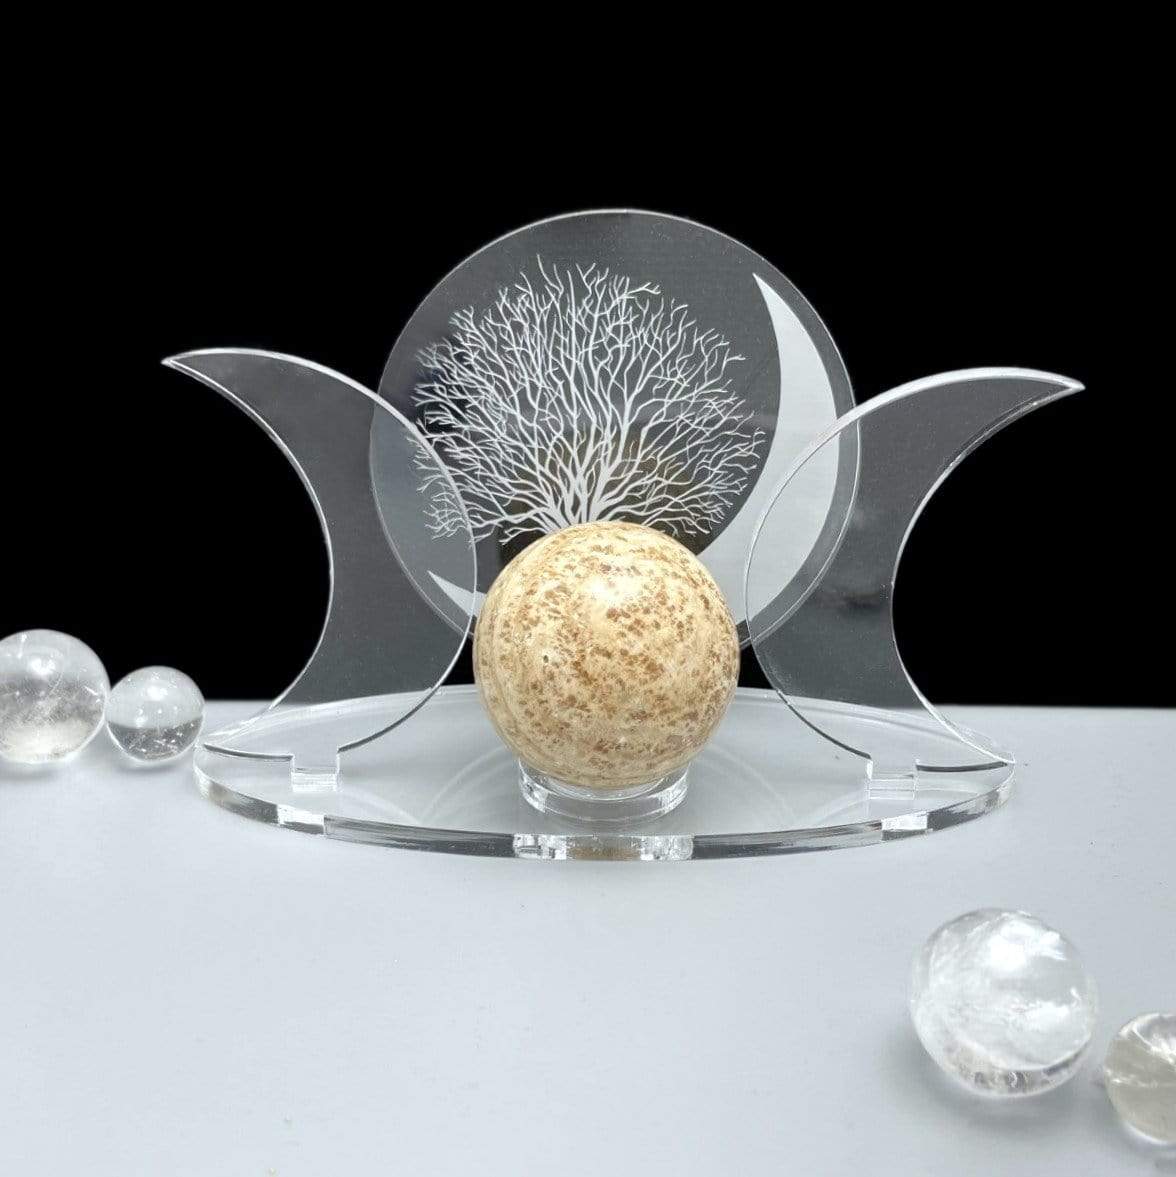 Front facing - Acrylic Sphere Holder Crescent Moons - Tree of Life holding a sphere with surrounding small spheres for display.